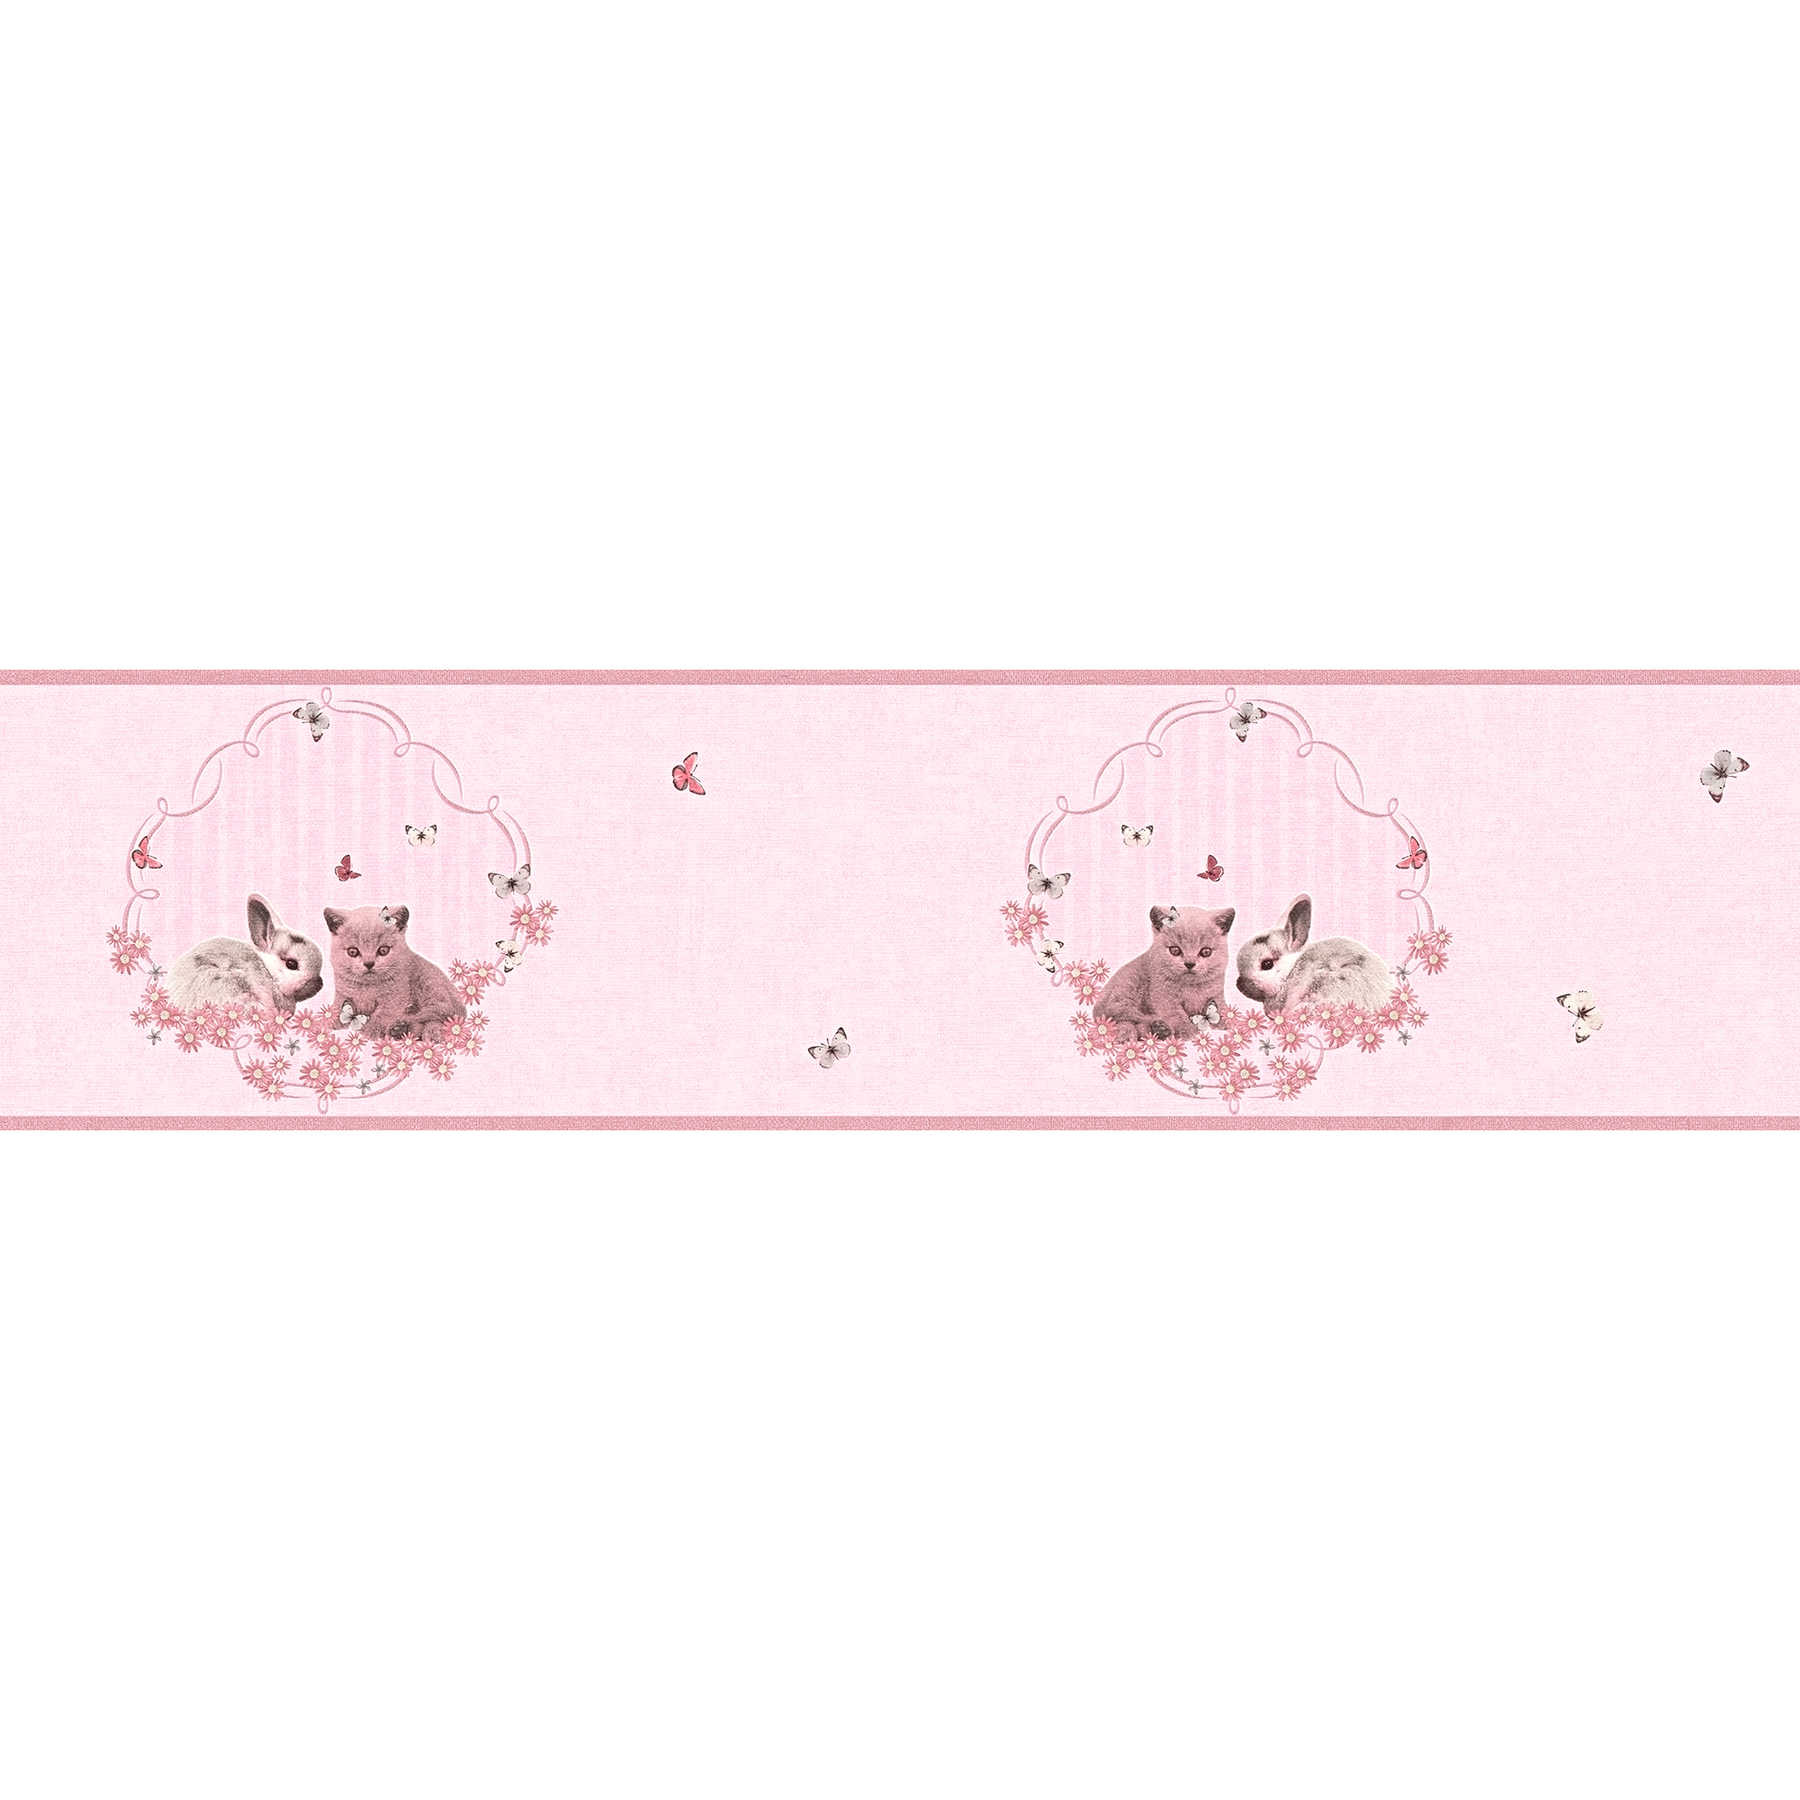         Kids Room Border Cat, Bunny & Butterfly - Pink
    